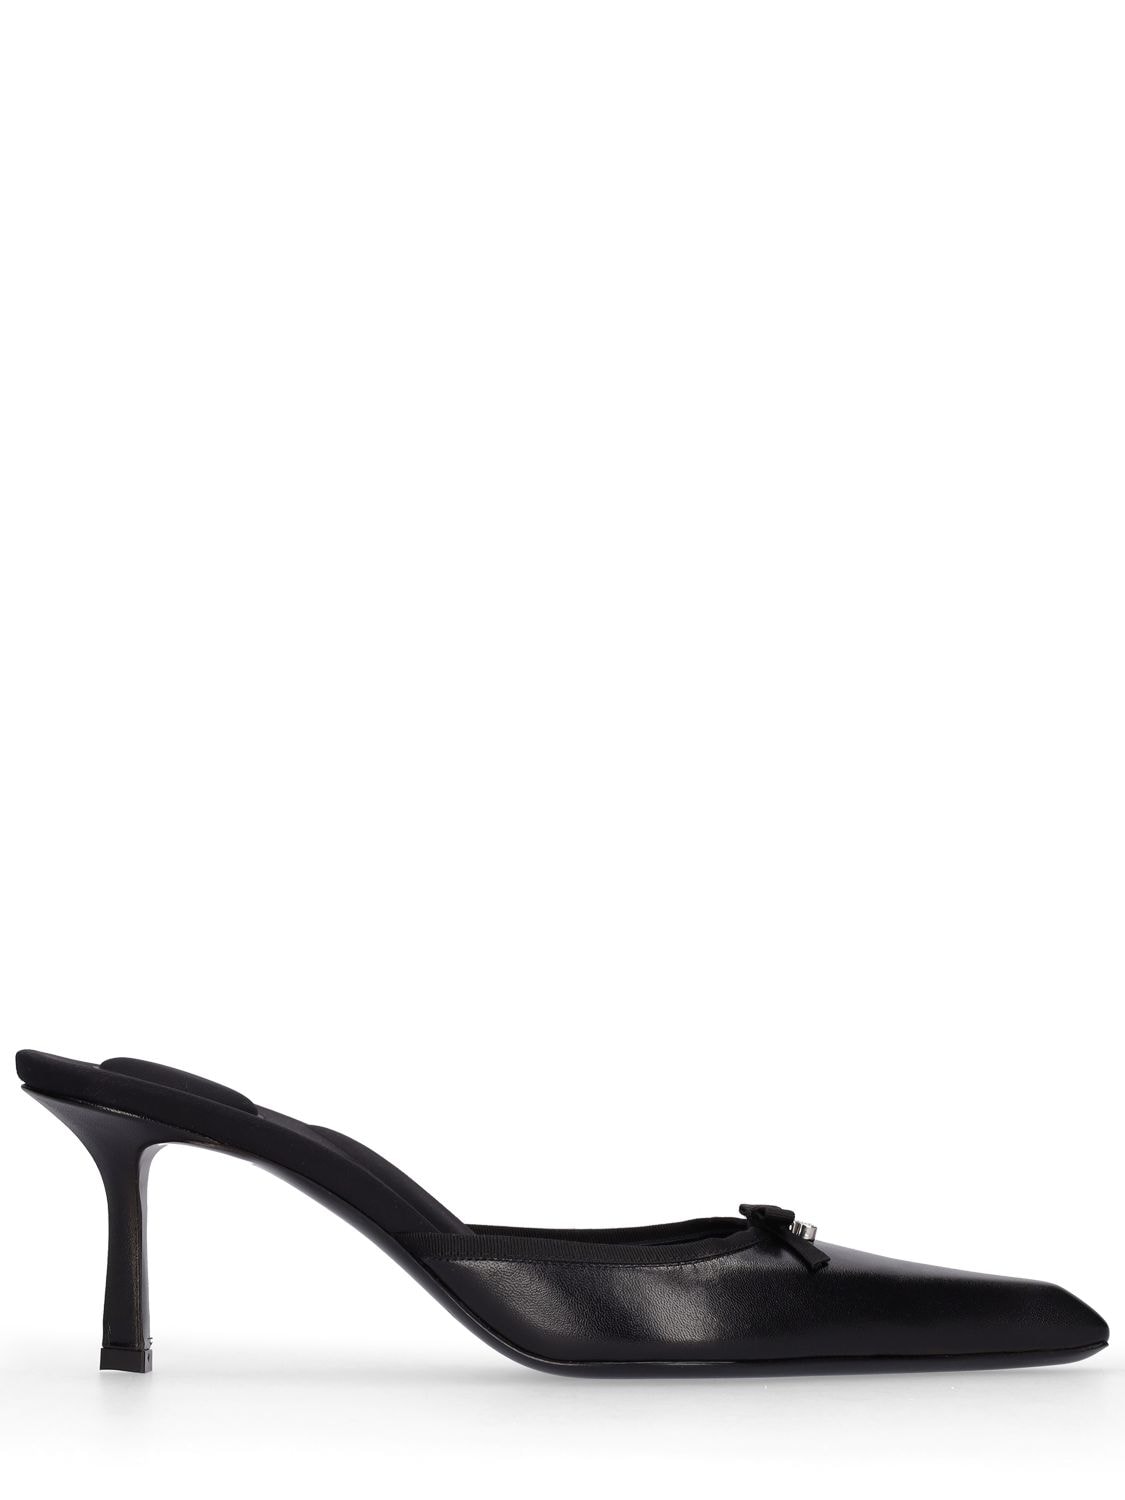 ALEXANDER WANG 65MM VIOLA PATENT LEATHER MULES